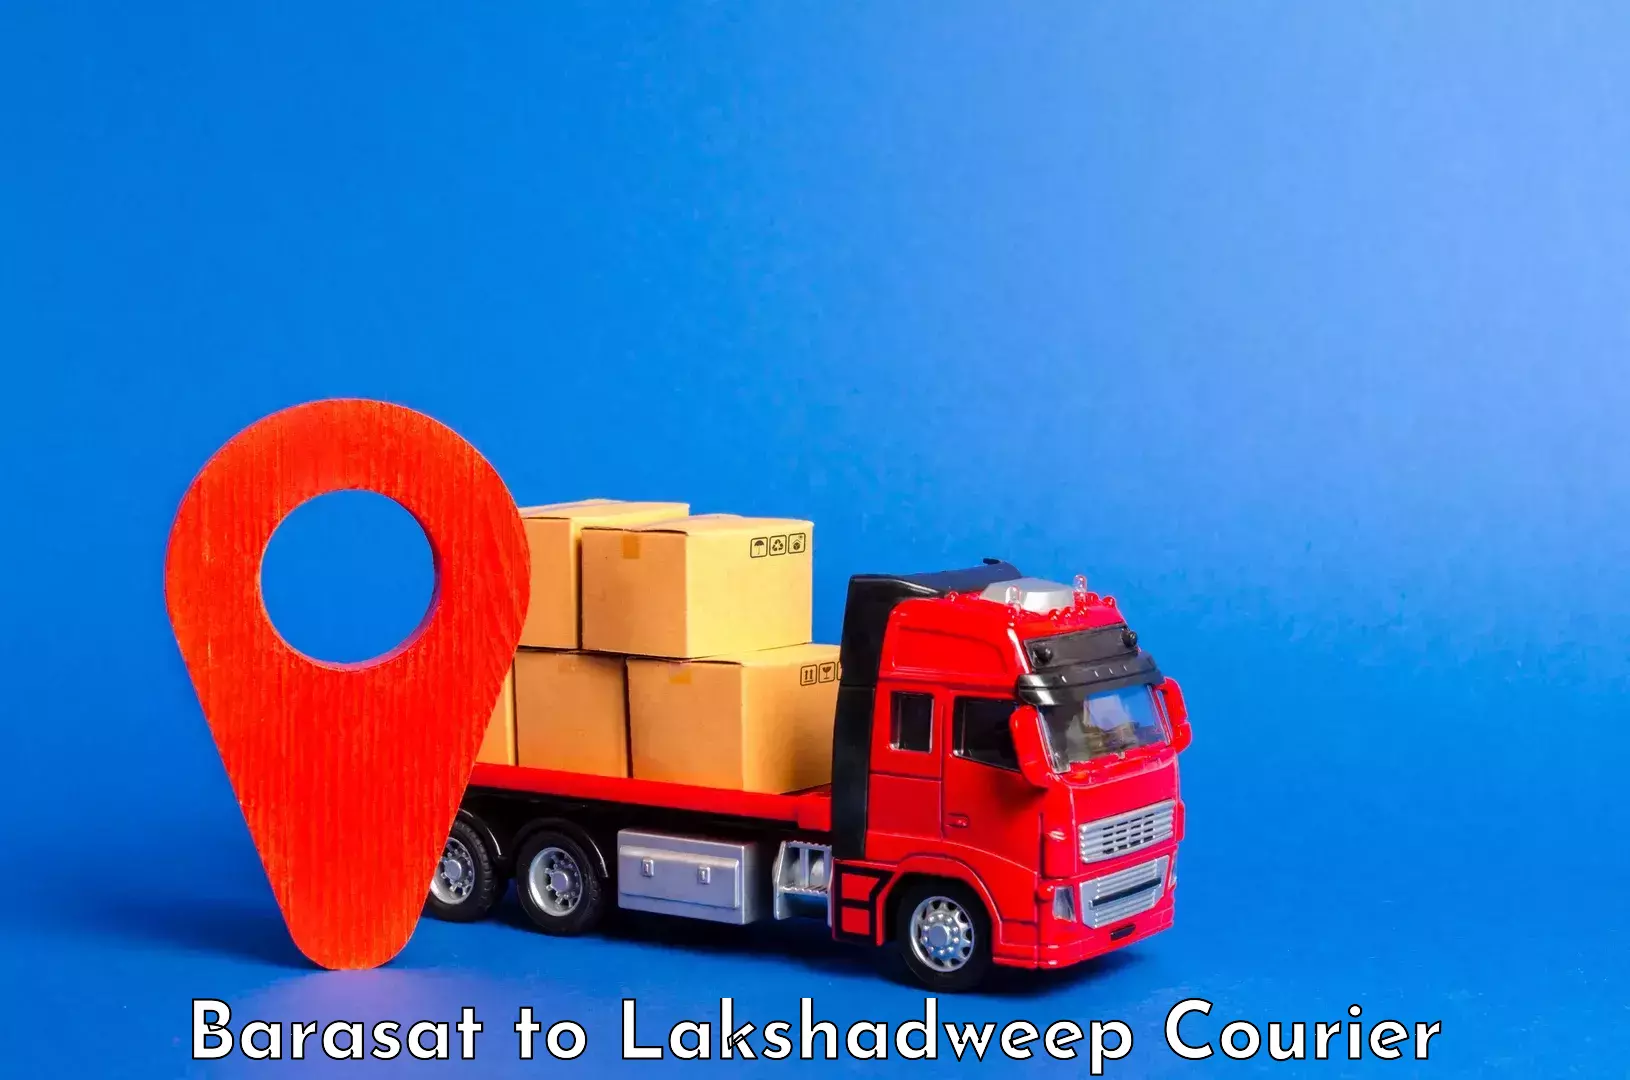 Luggage delivery system Barasat to Lakshadweep